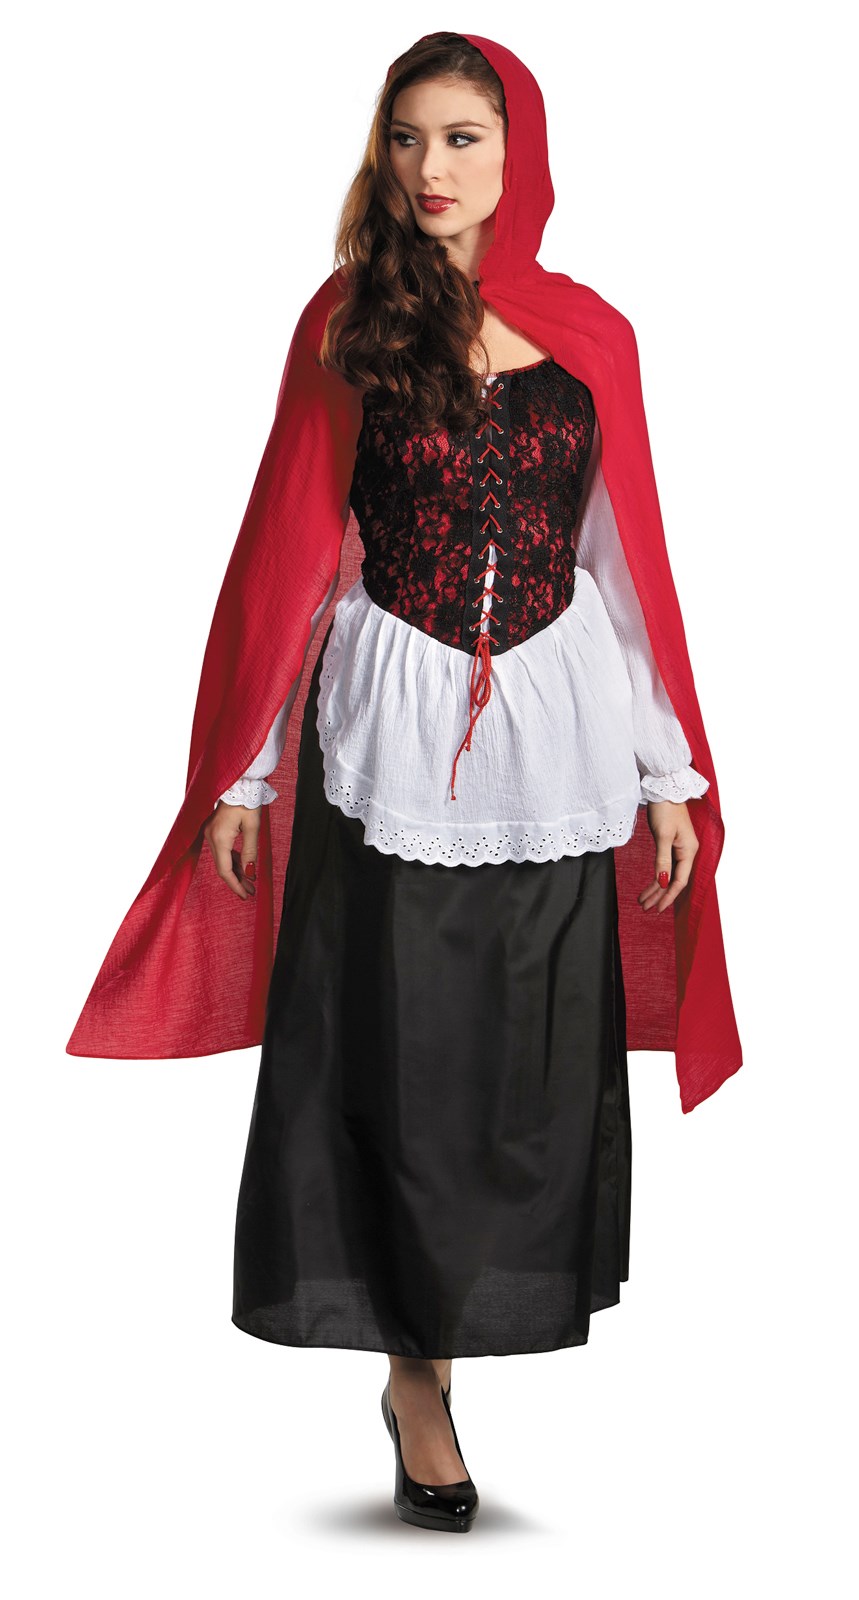 Red Riding Hood Deluxe Adult Costume